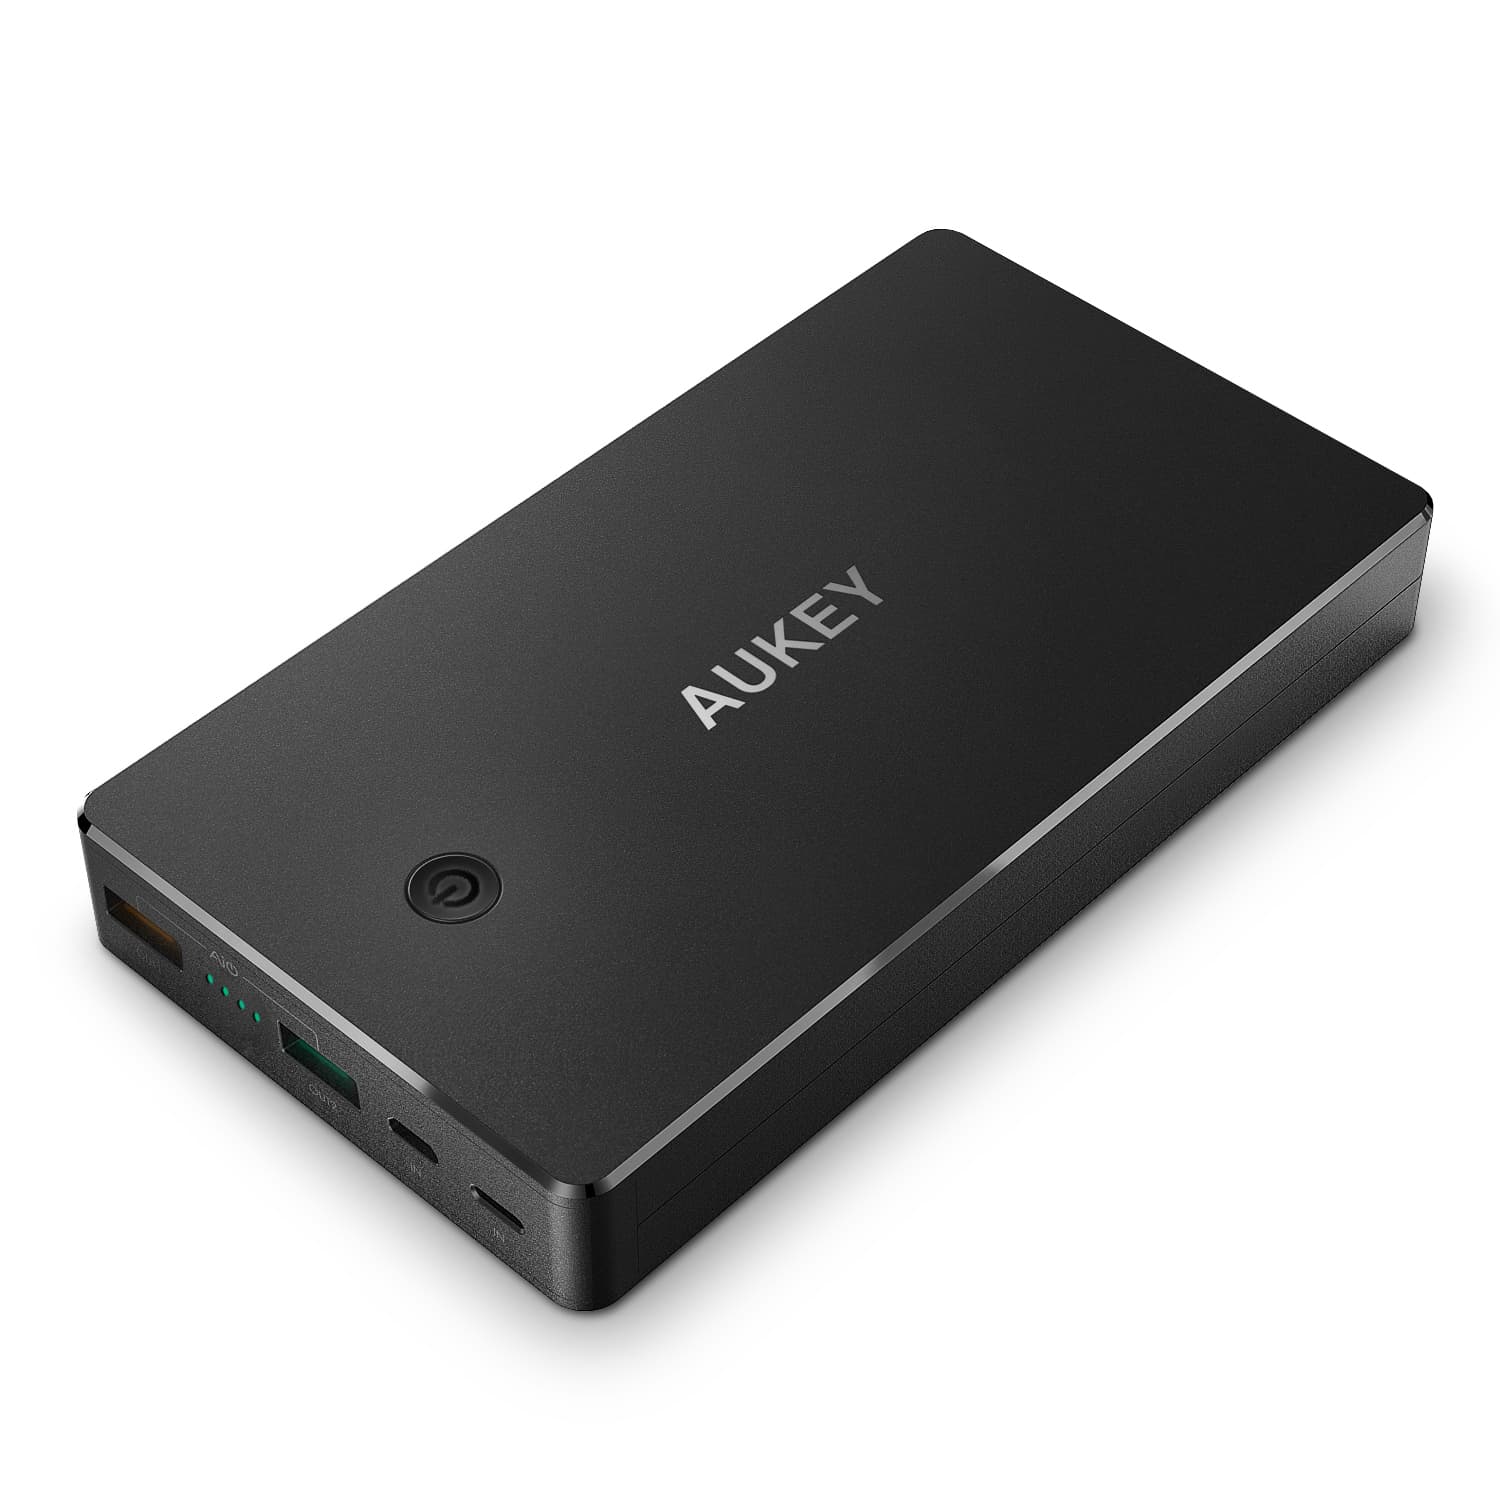 AUKEY PB-T10 V3 20000mAh Qualcomm Quick Charge 3.0 Power Bank with FCP - Aukey Malaysia Official Store